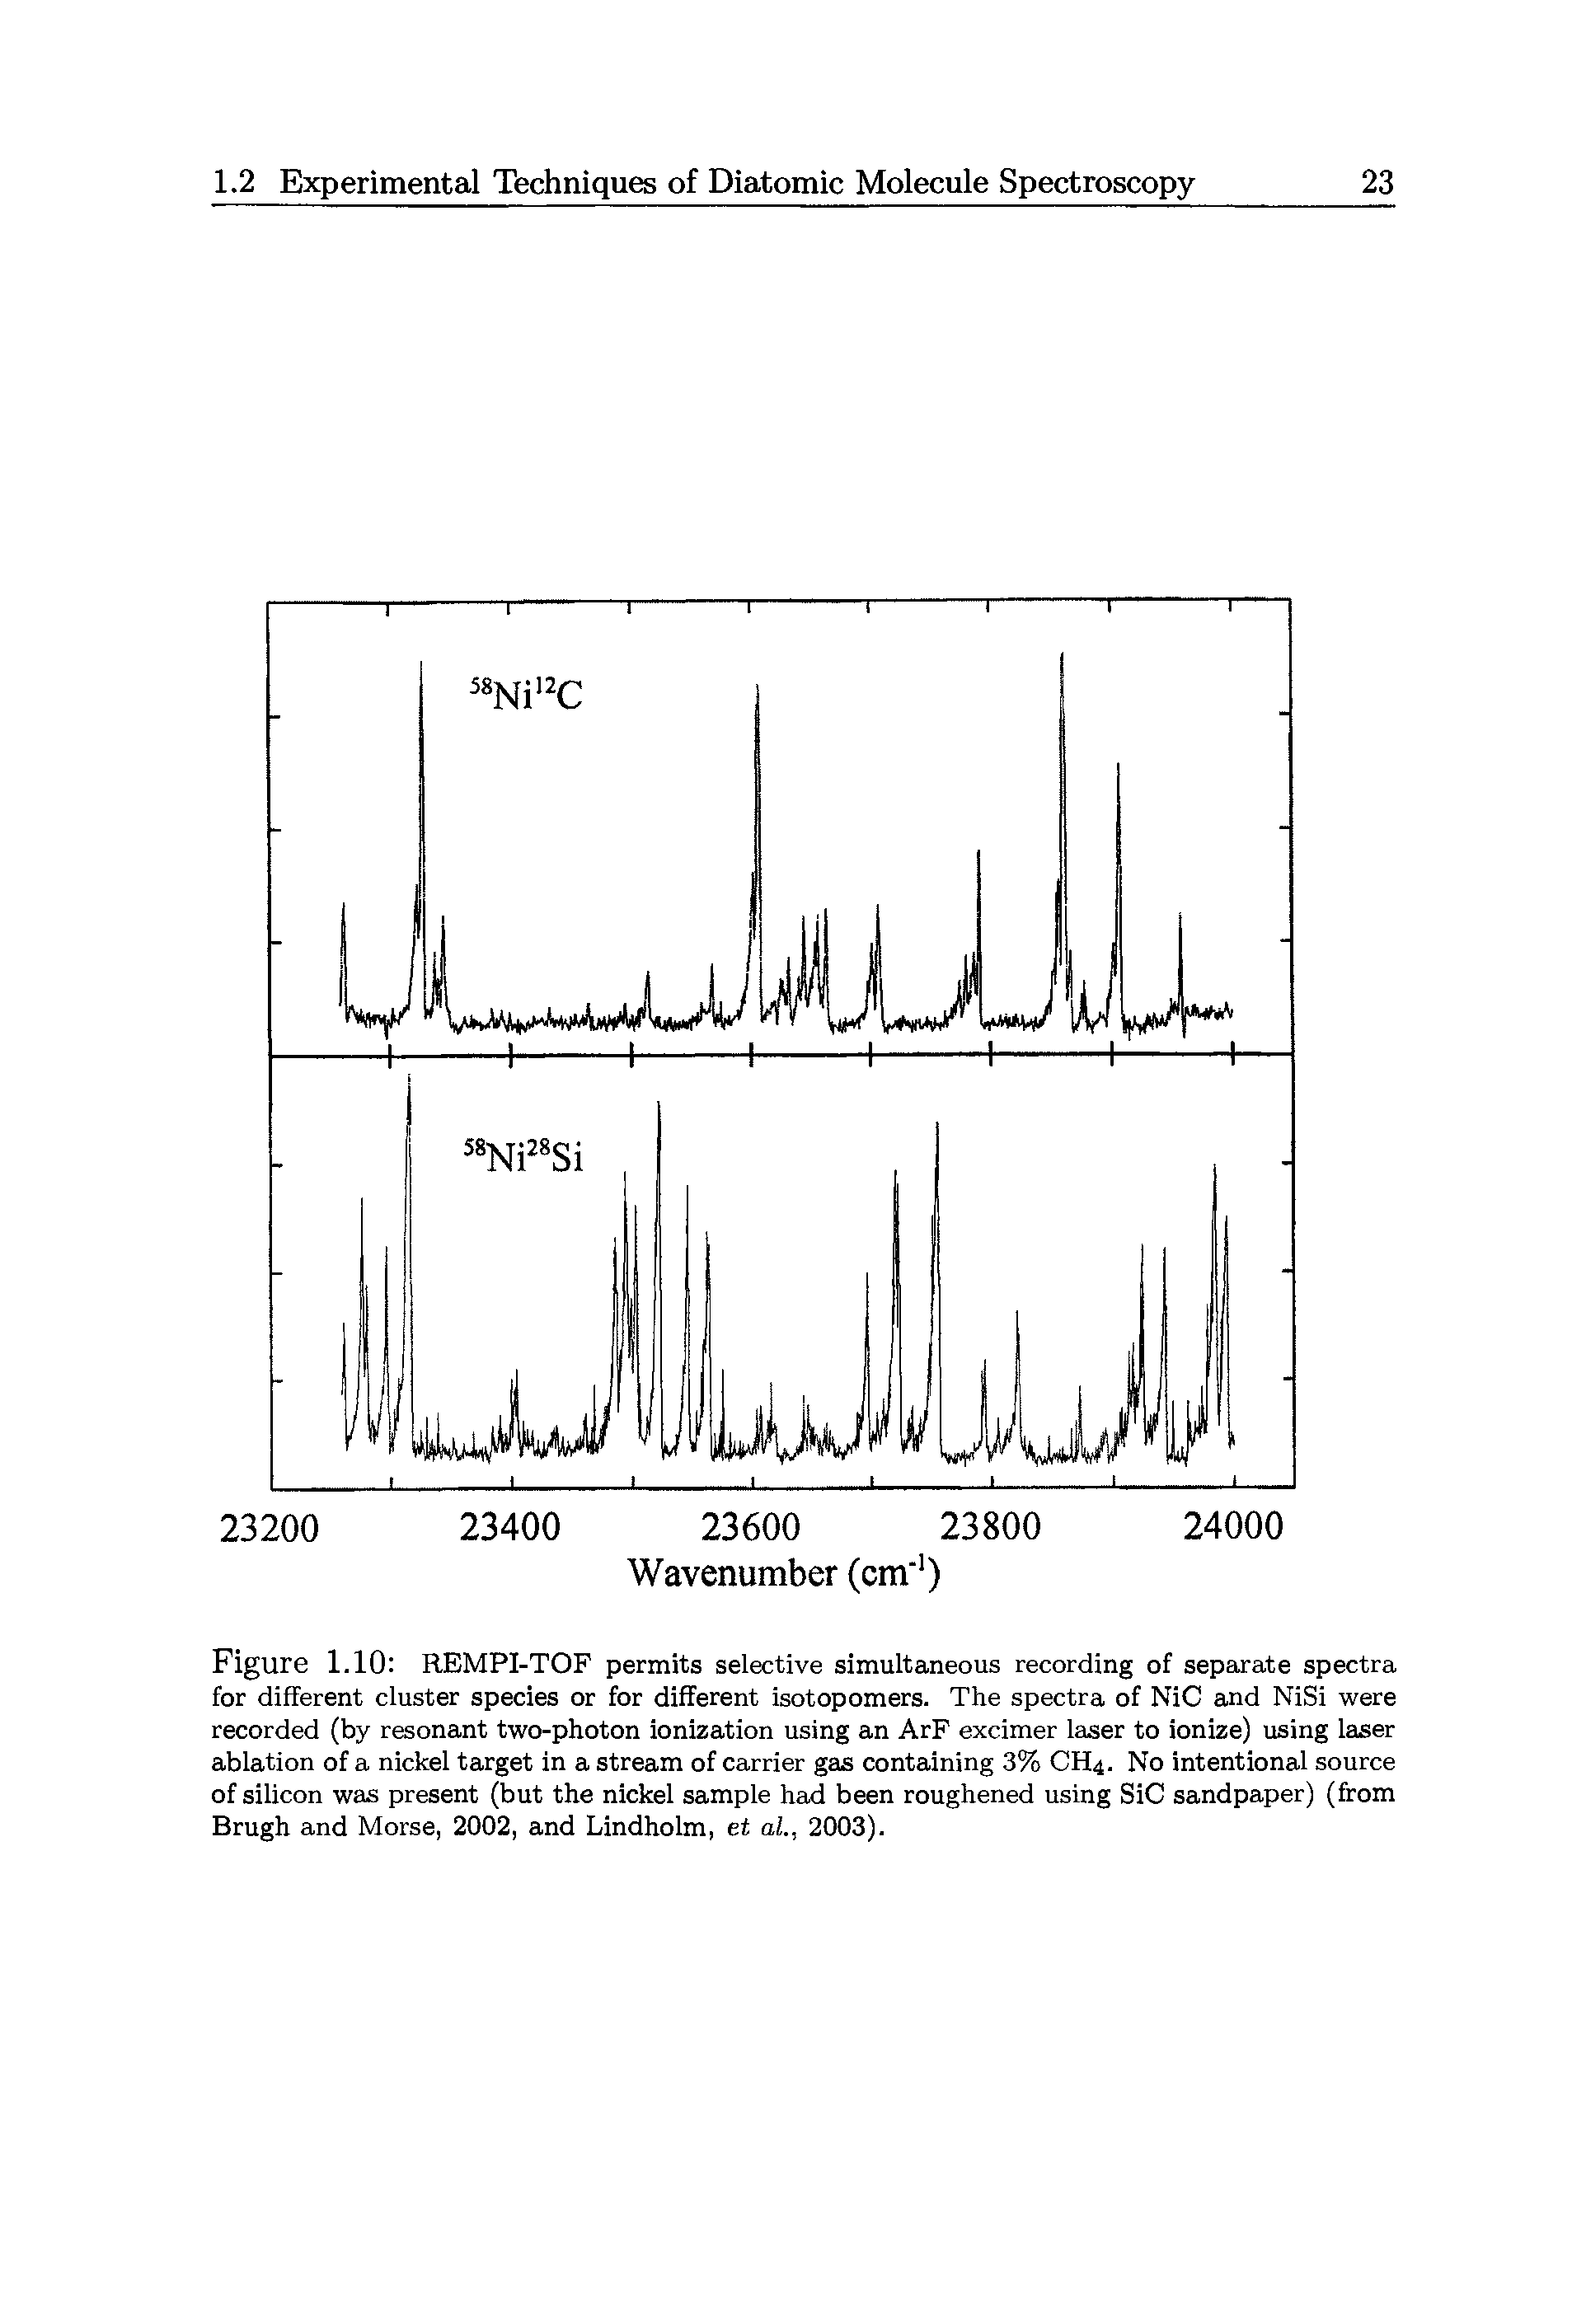 Figure 1.10 REMPI-TOF permits selective simultaneous recording of separate spectra for different cluster species or for different isotopomers. The spectra of NiC and NiSi were recorded (by resonant two-photon ionization using an ArF excimer laser to ionize) using laser ablation of a nickel target in a stream of carrier gas containing 3% CH4. No intentional source of silicon was present (but the nickel sample had been roughened using SiC sandpaper) (from Brugh and Morse, 2002, and Lindholm, et al, 2003).